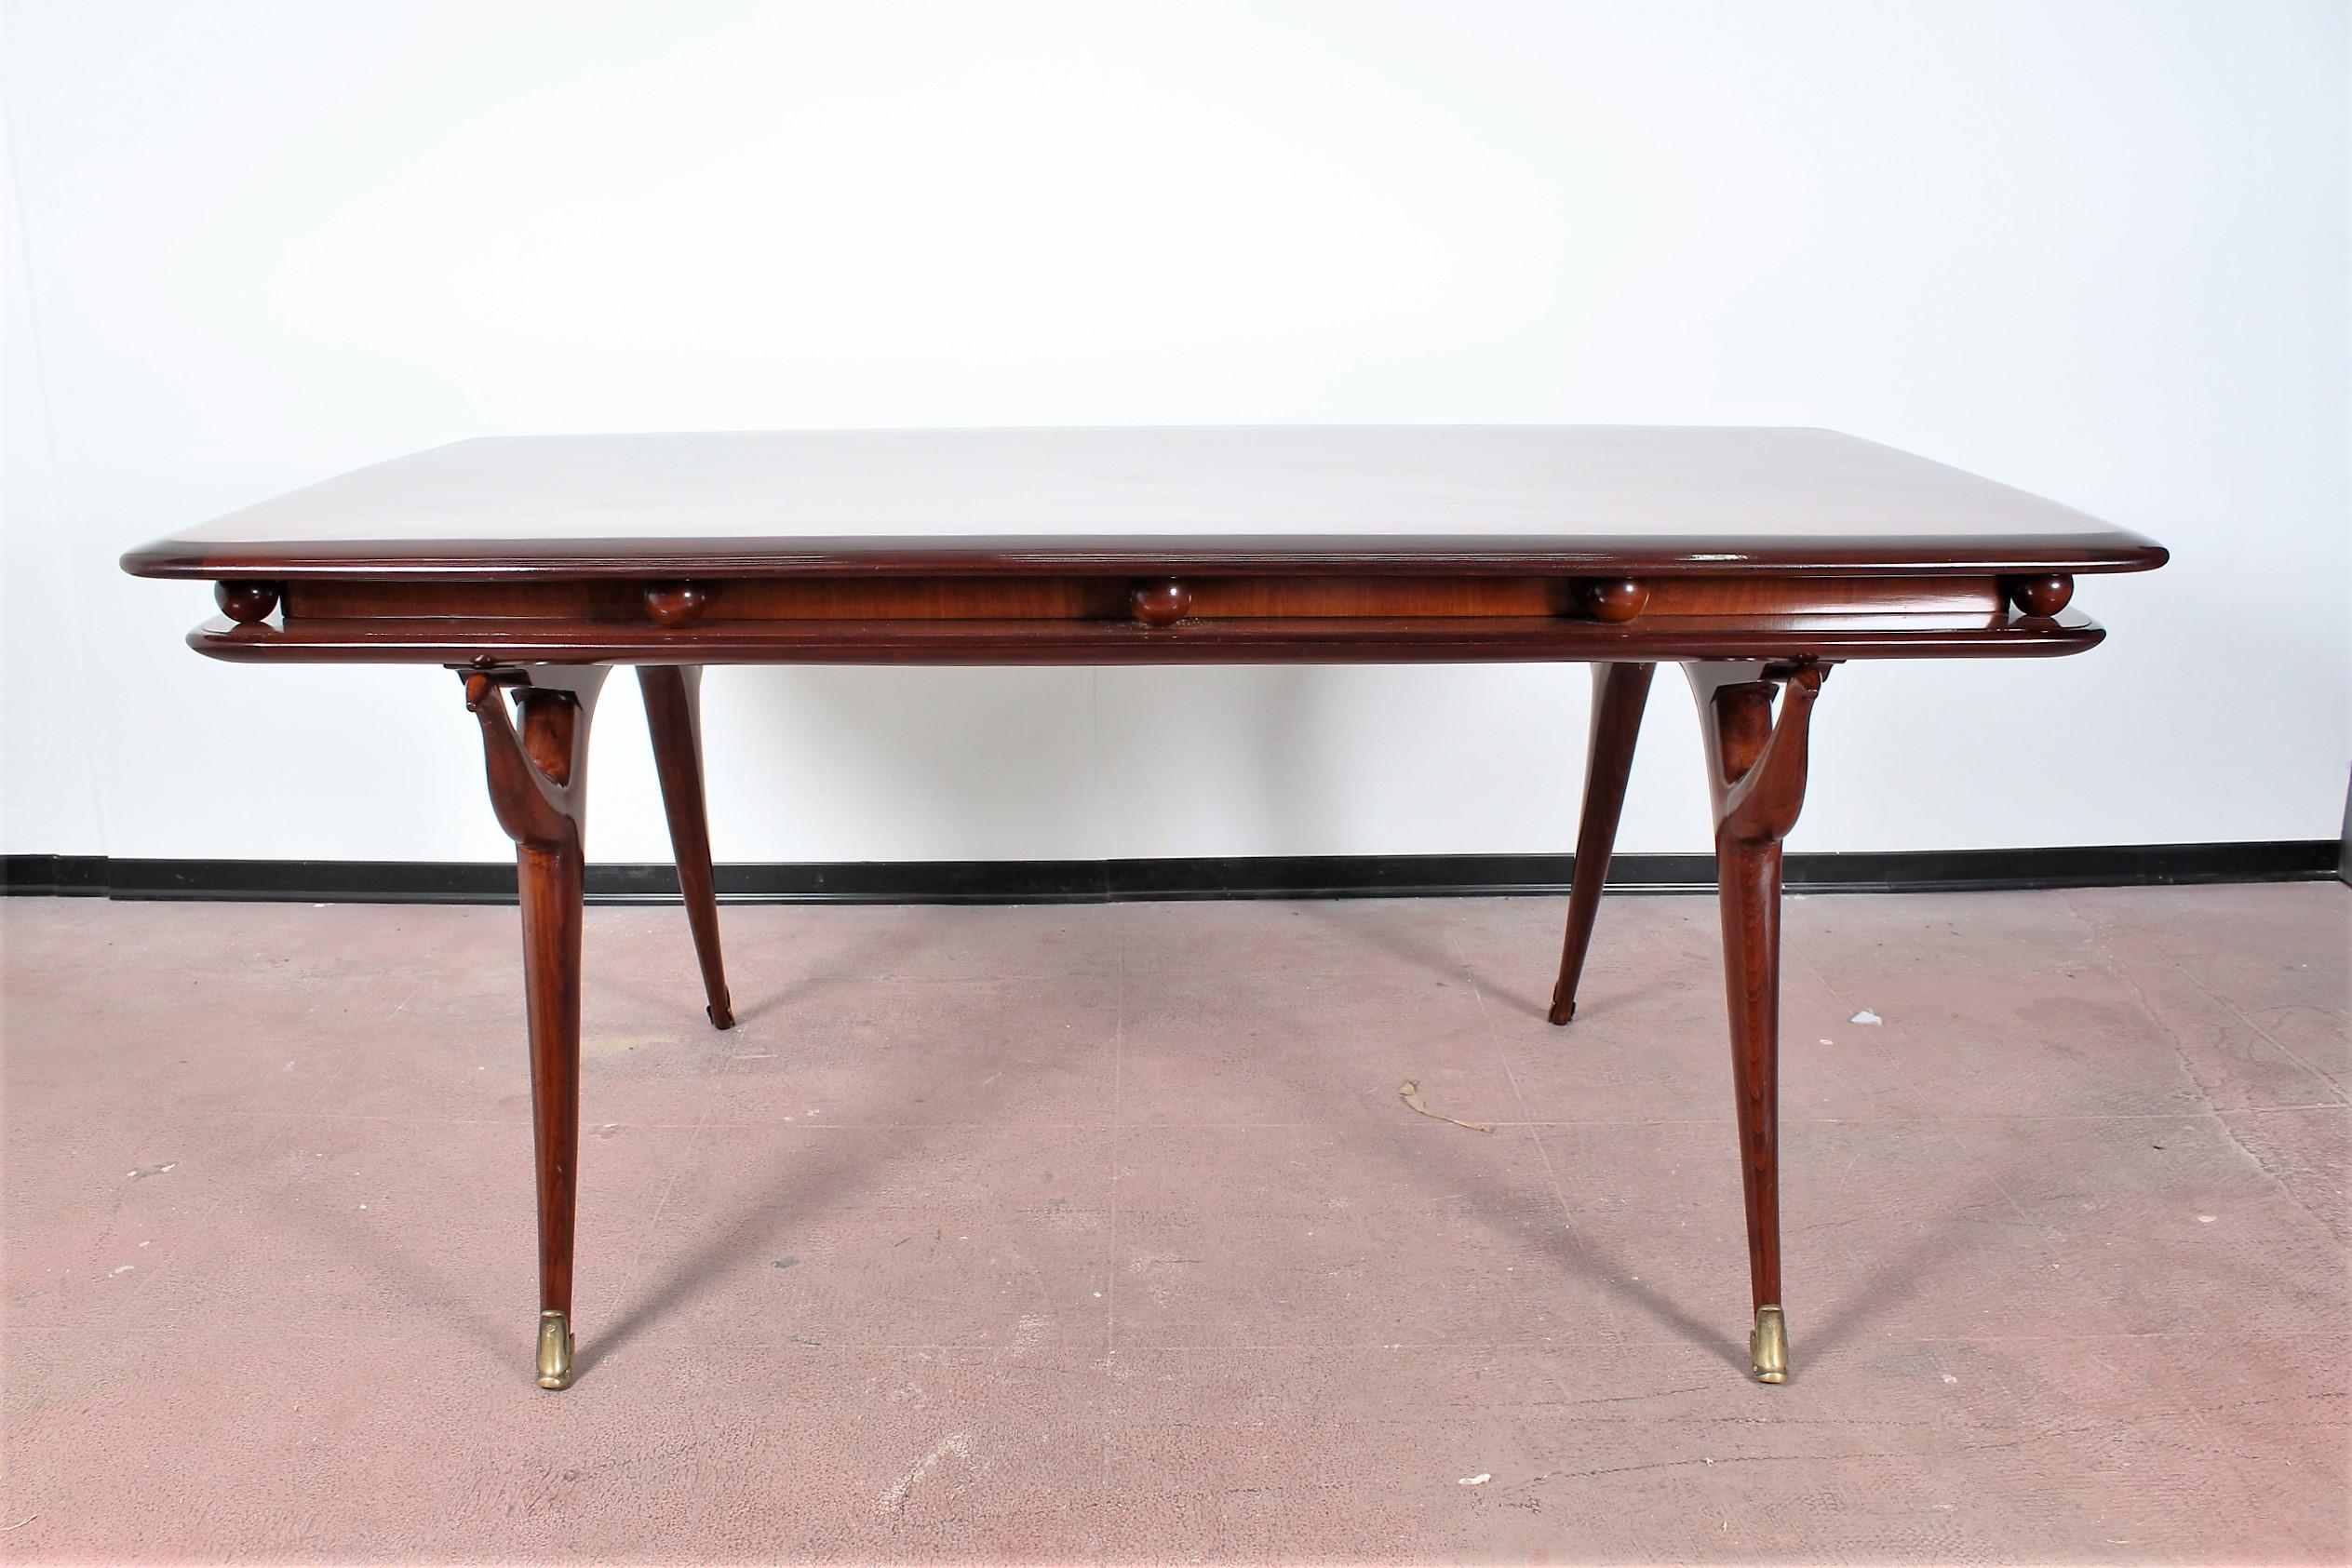 Elegant and prestigious rectangular table in brown wood, with beautiful and original spherical and animal-shaped decorative elements. Attributed to Giuseppe Anzani, Italy, 1950s
The table has been restored.
Wear consistent with age and use.

 